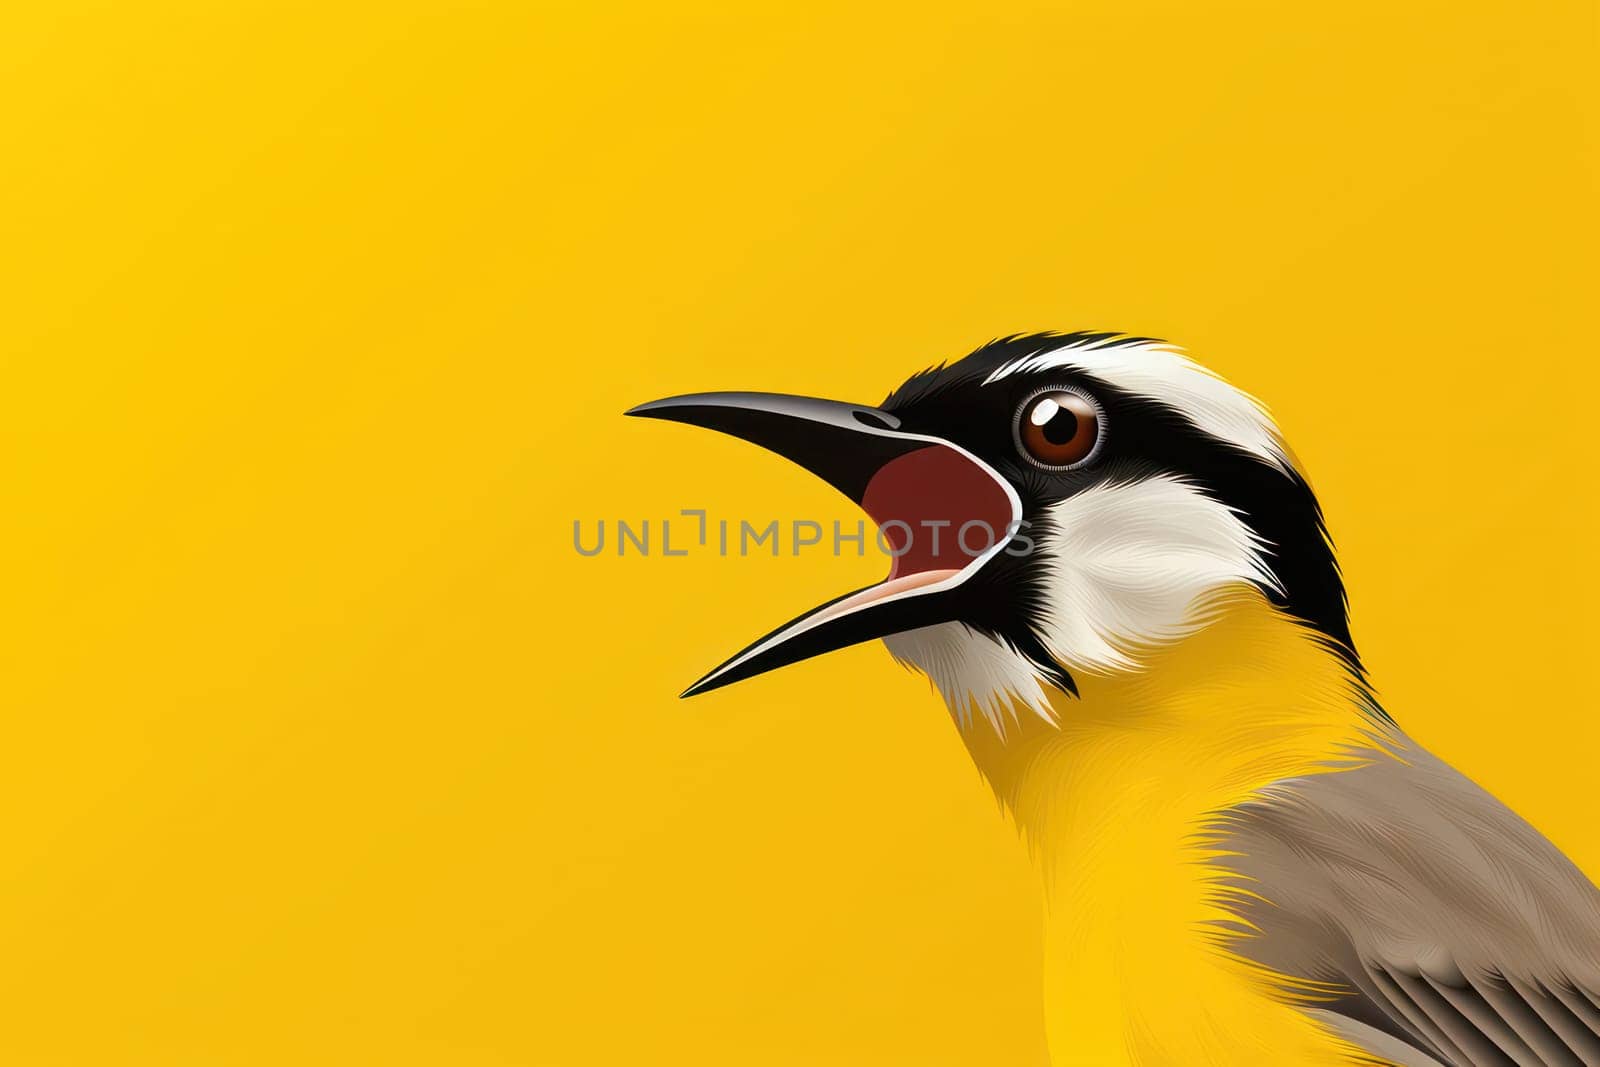 Colorful Wildlife Portrait: Black and White Penguin with Colorful Feathered Beak, Perched on a Branch, Isolated on Green Tropical Island Background